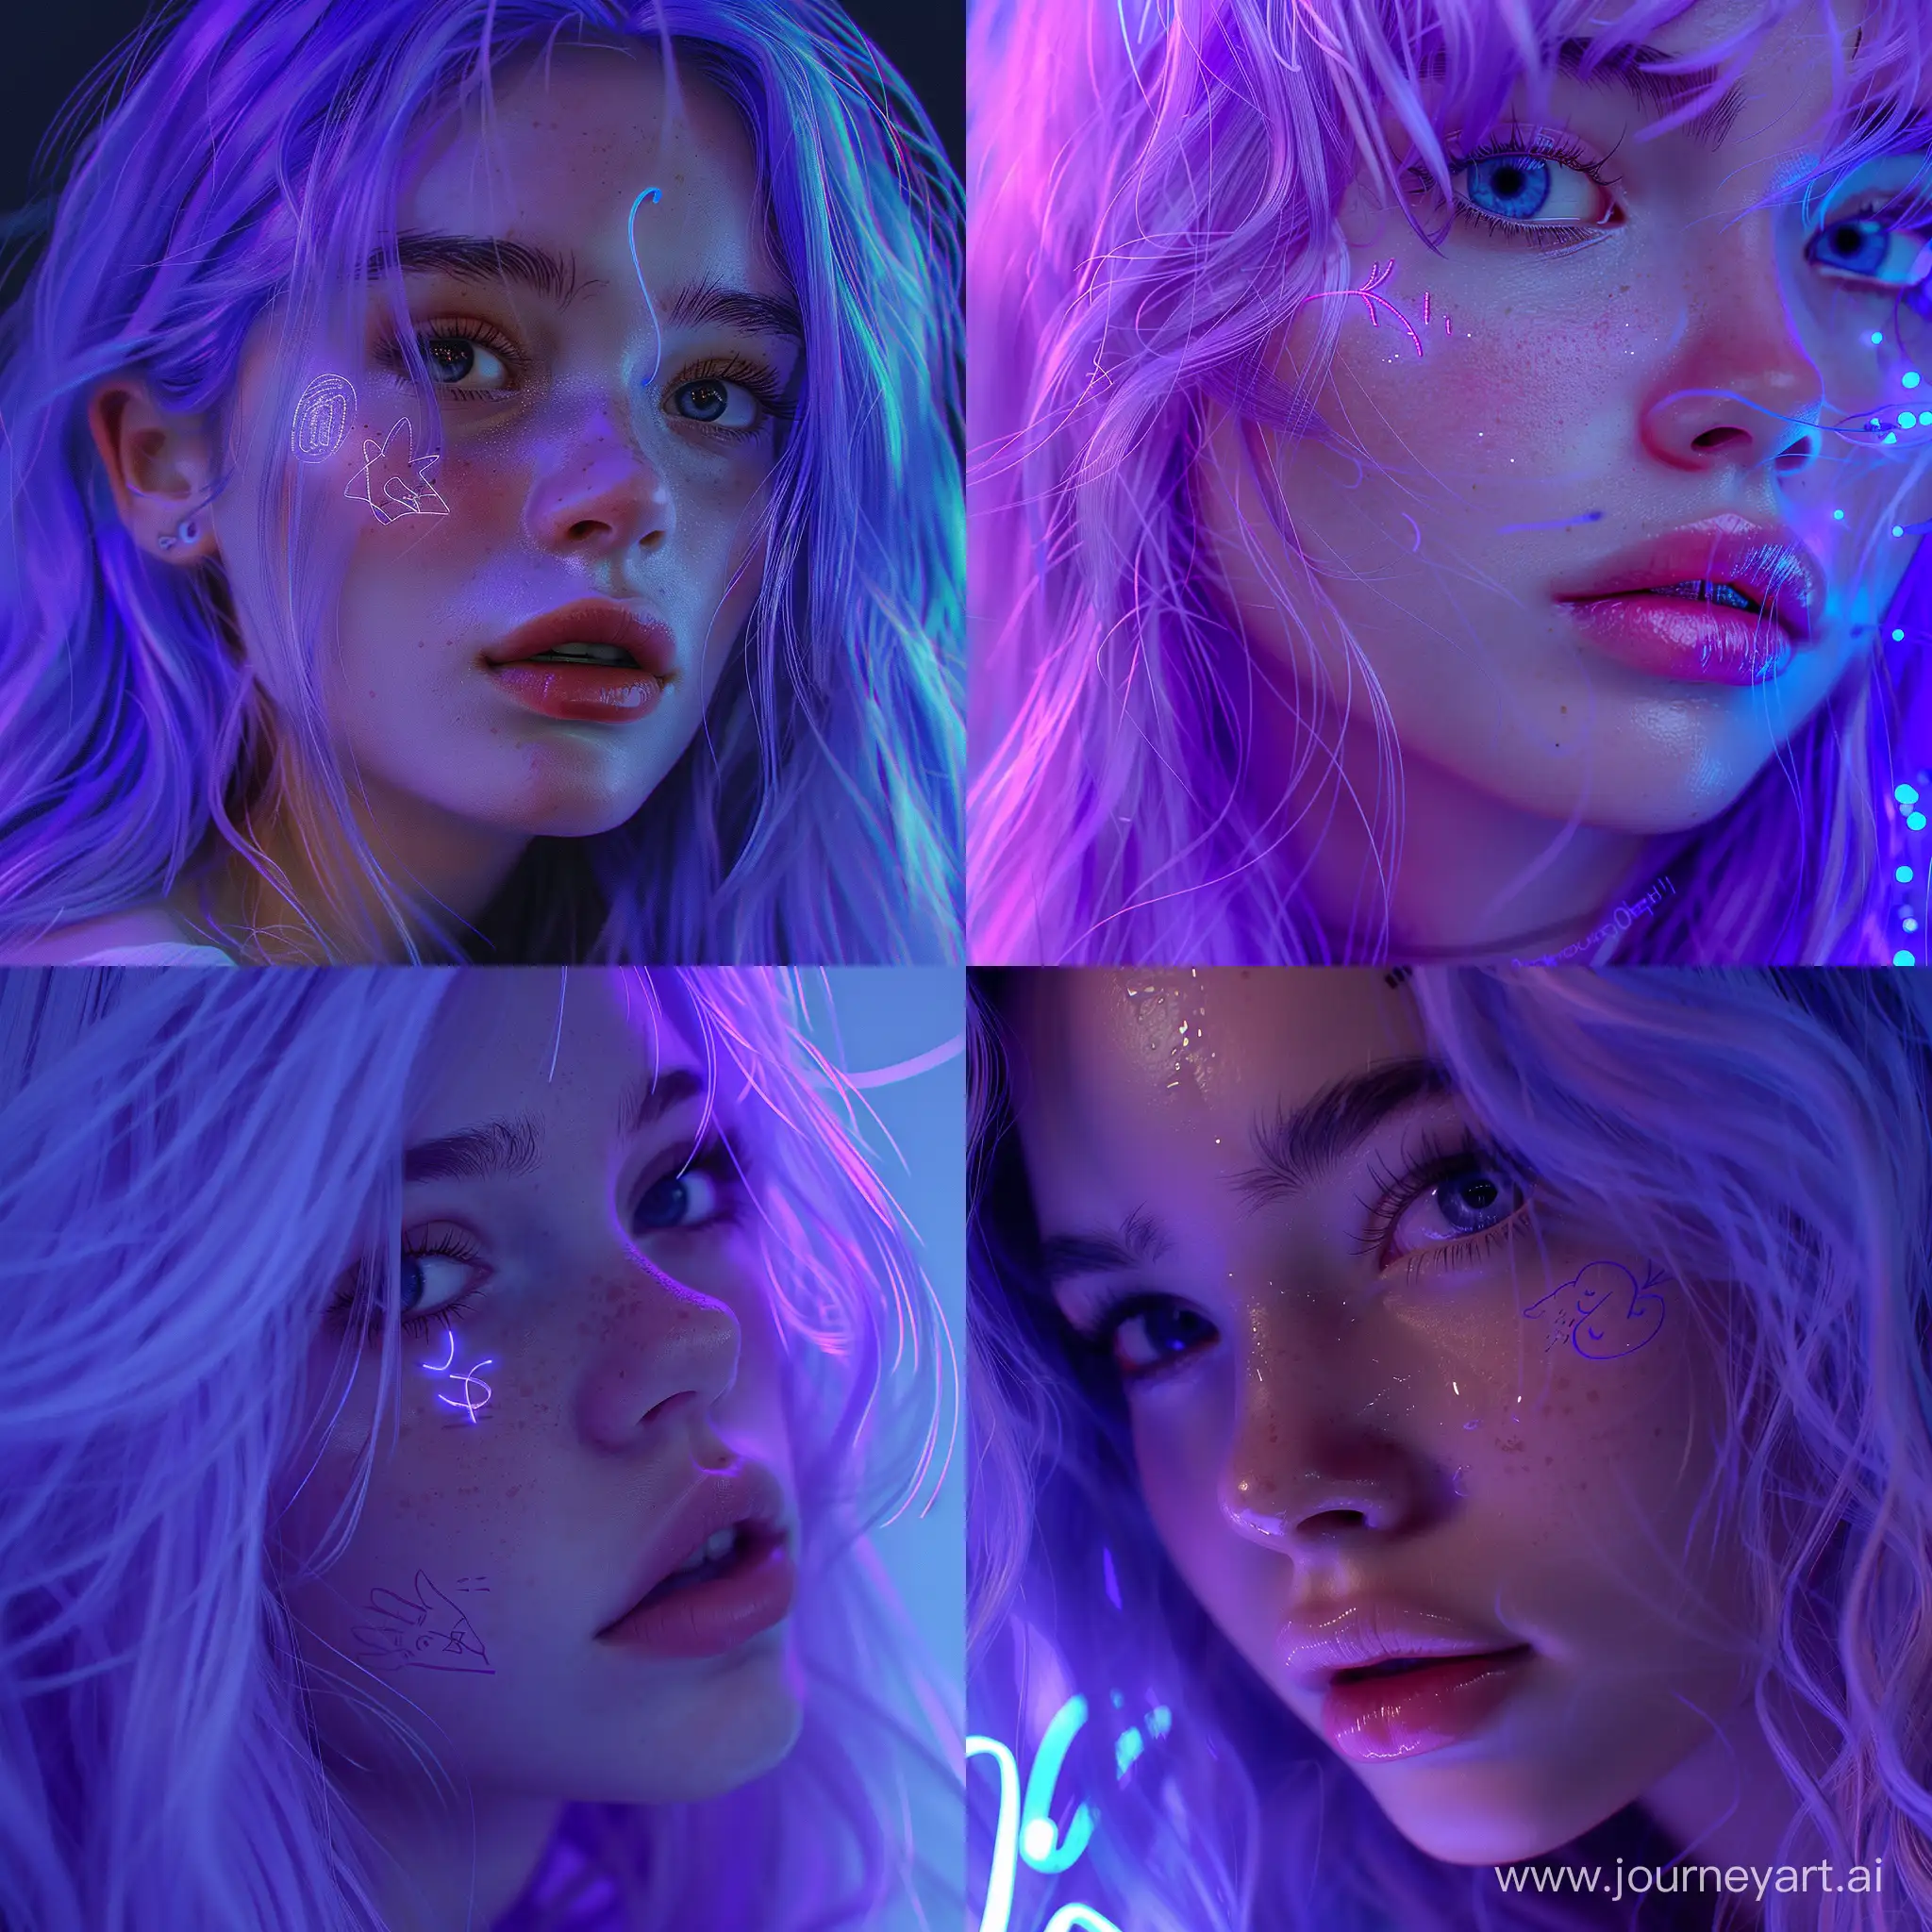 Beautiful detailed face of a 24 year old girl with soft purple hair, lovely, soft purple hair, small felt-tip pen drawing on her cheek, lovely, blue neon light hits the girl's face